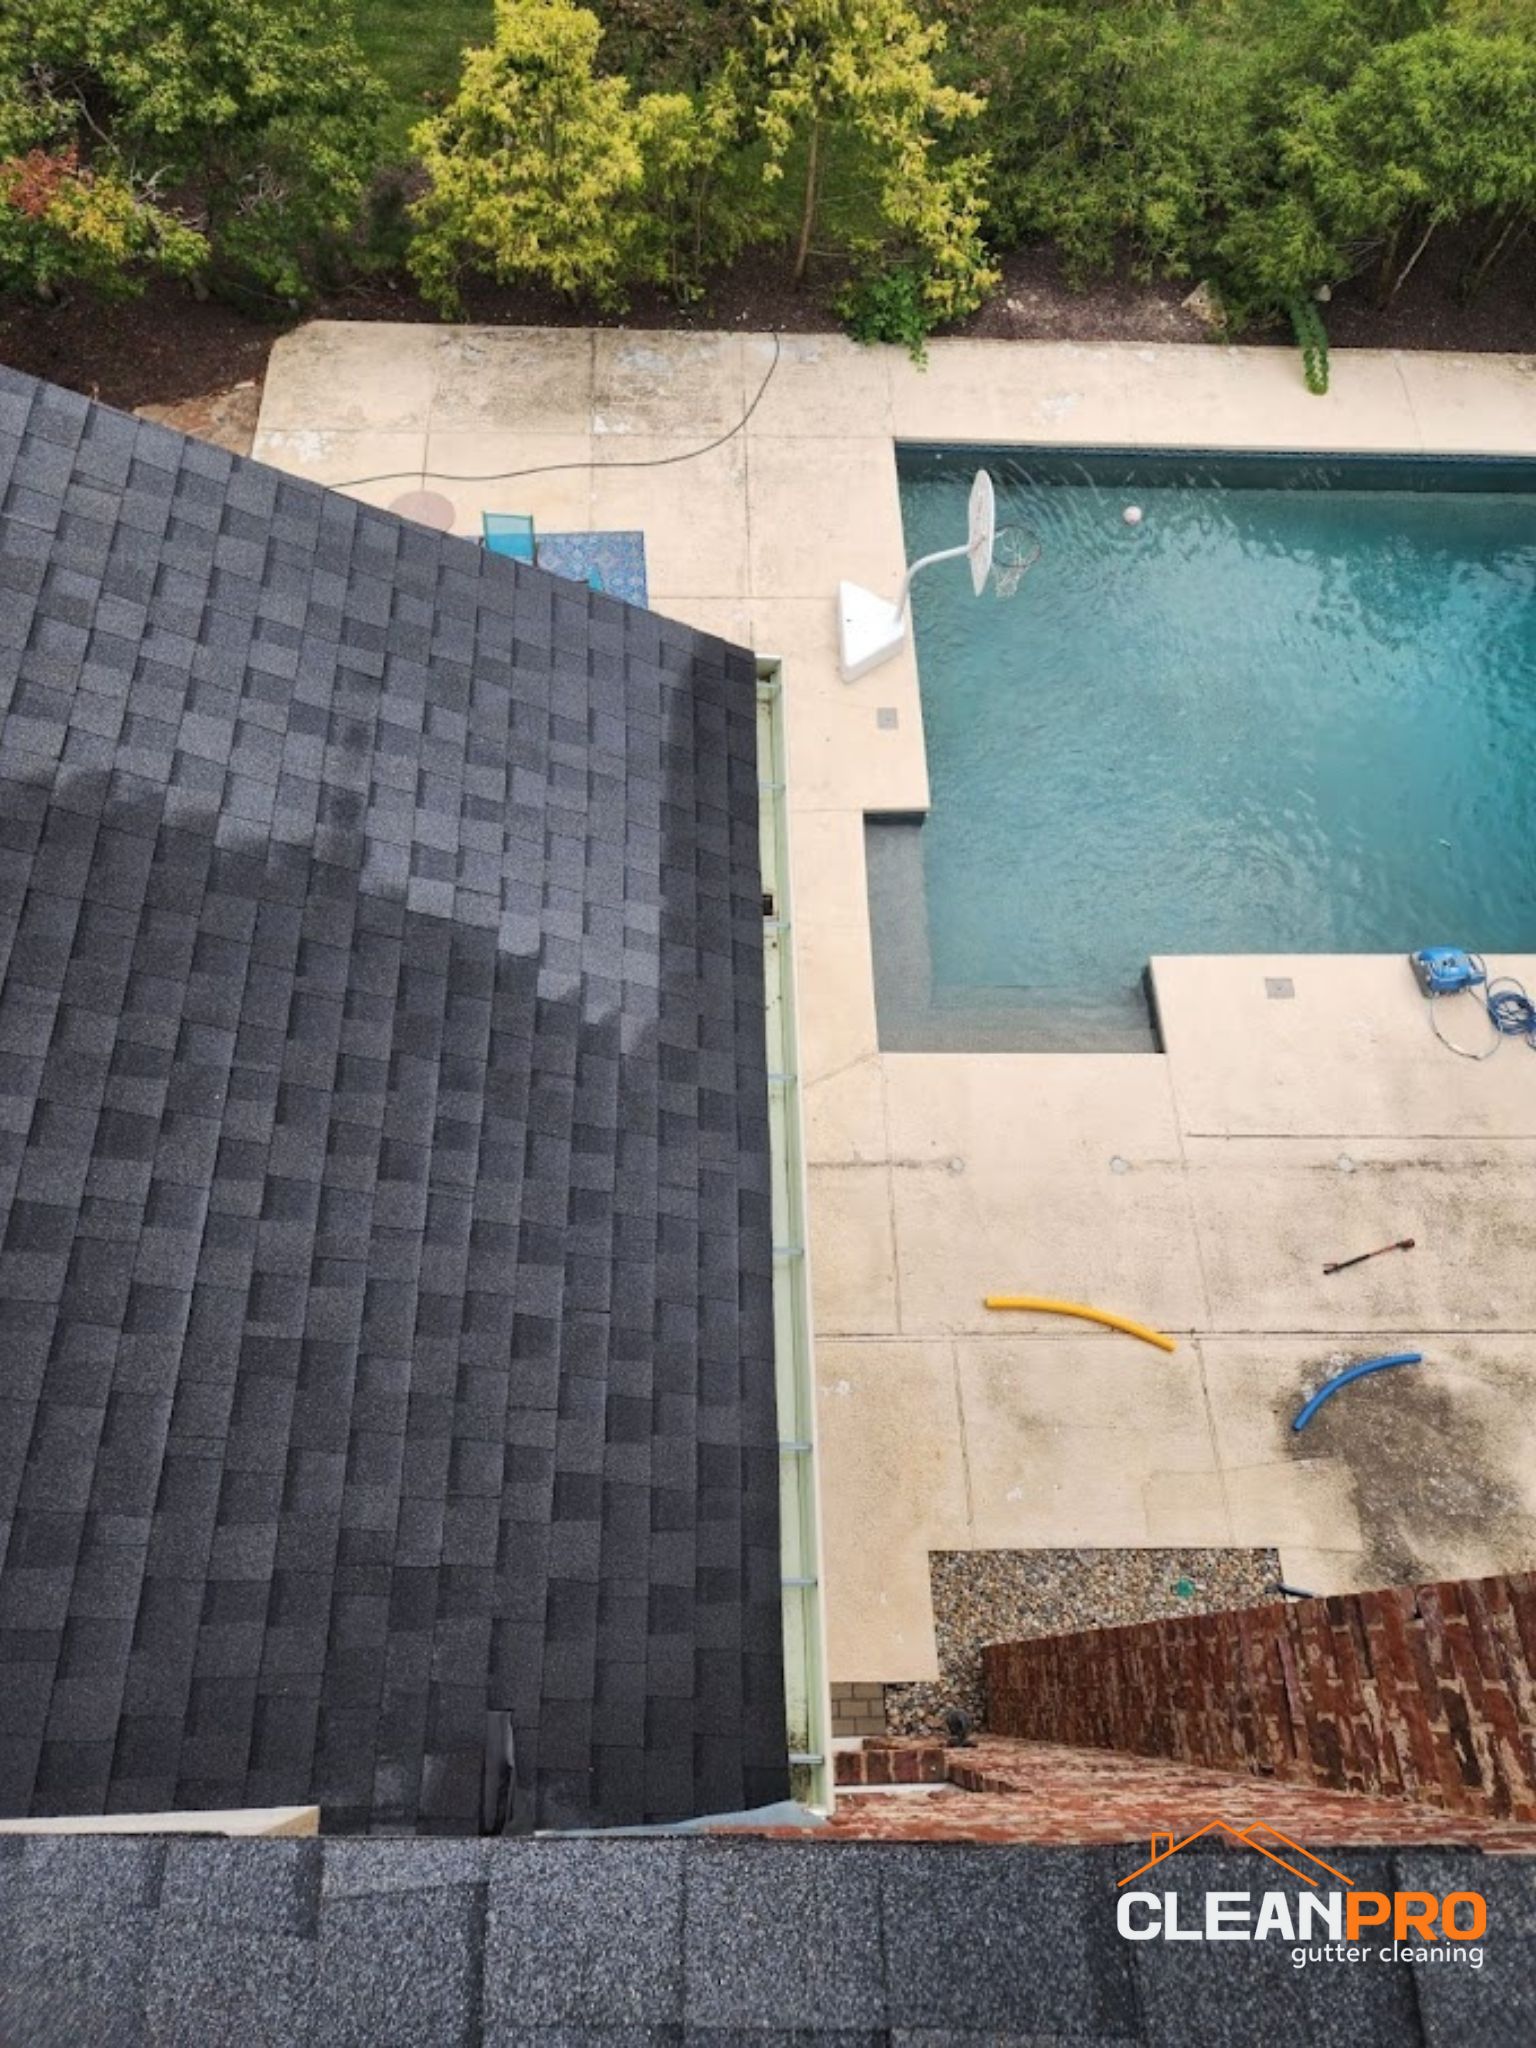 Top Notch Gutter Cleaning Service in St Louis